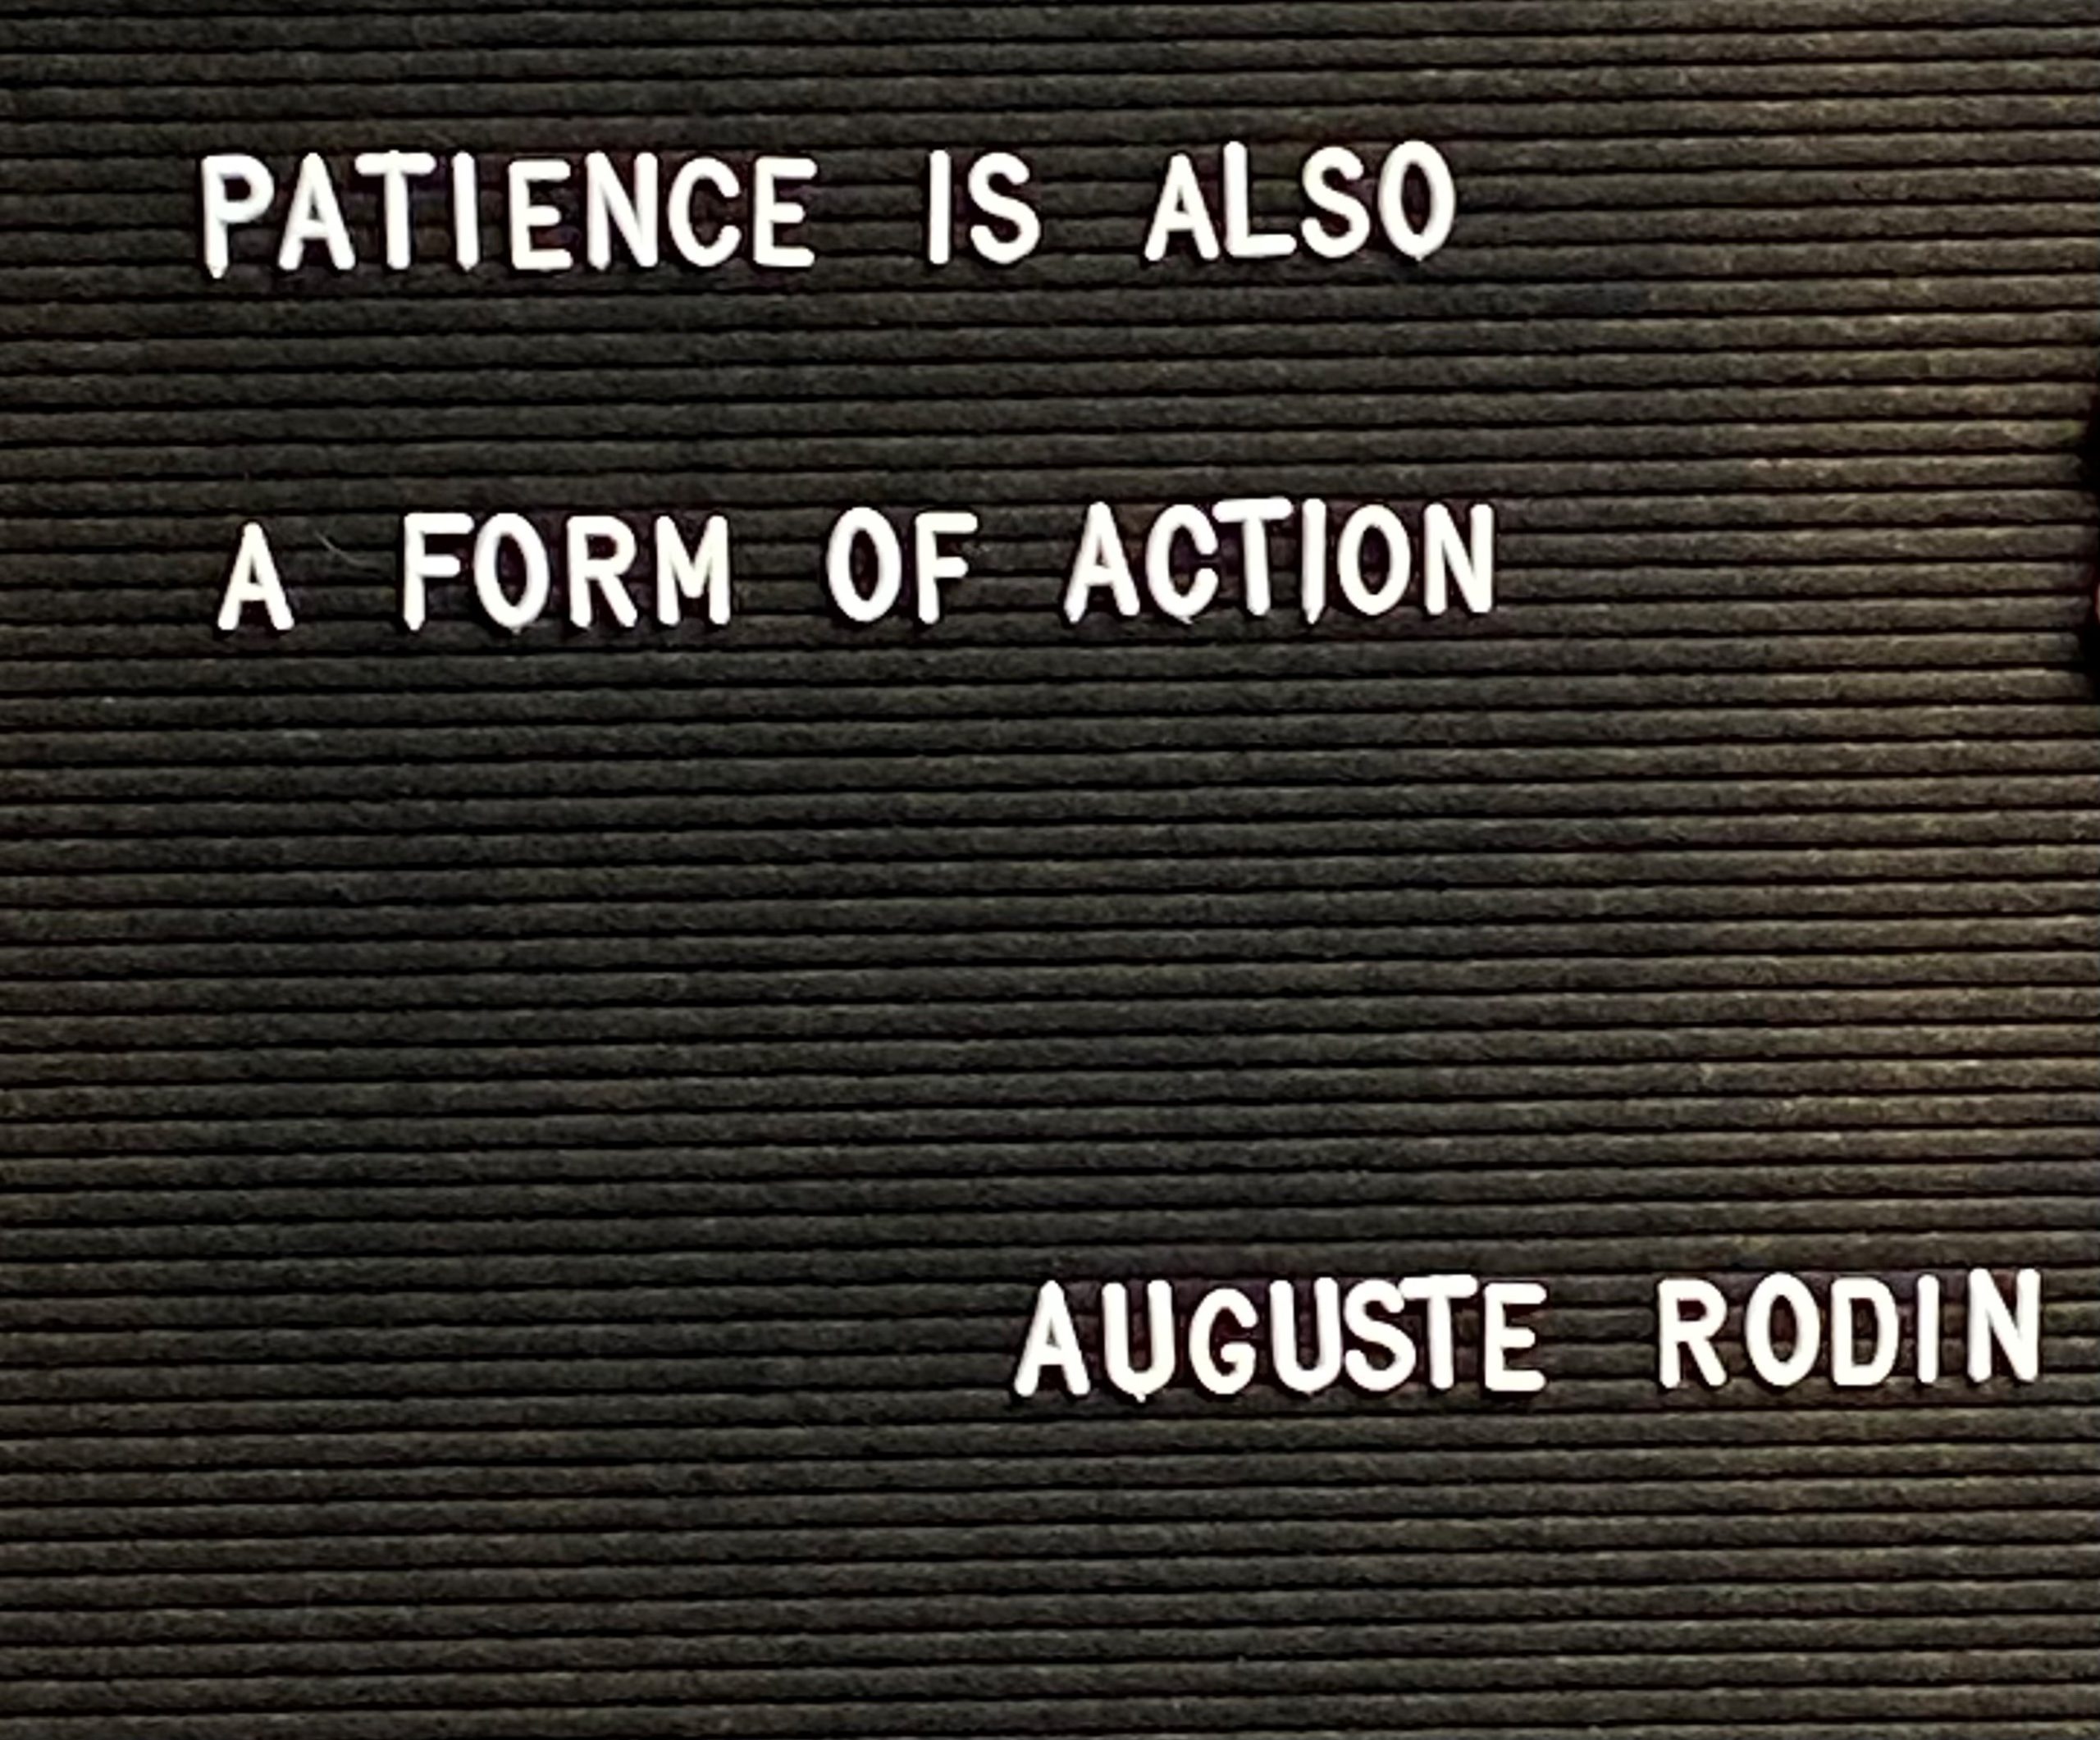 Motivational Quote by Auguste Rodin About Patience